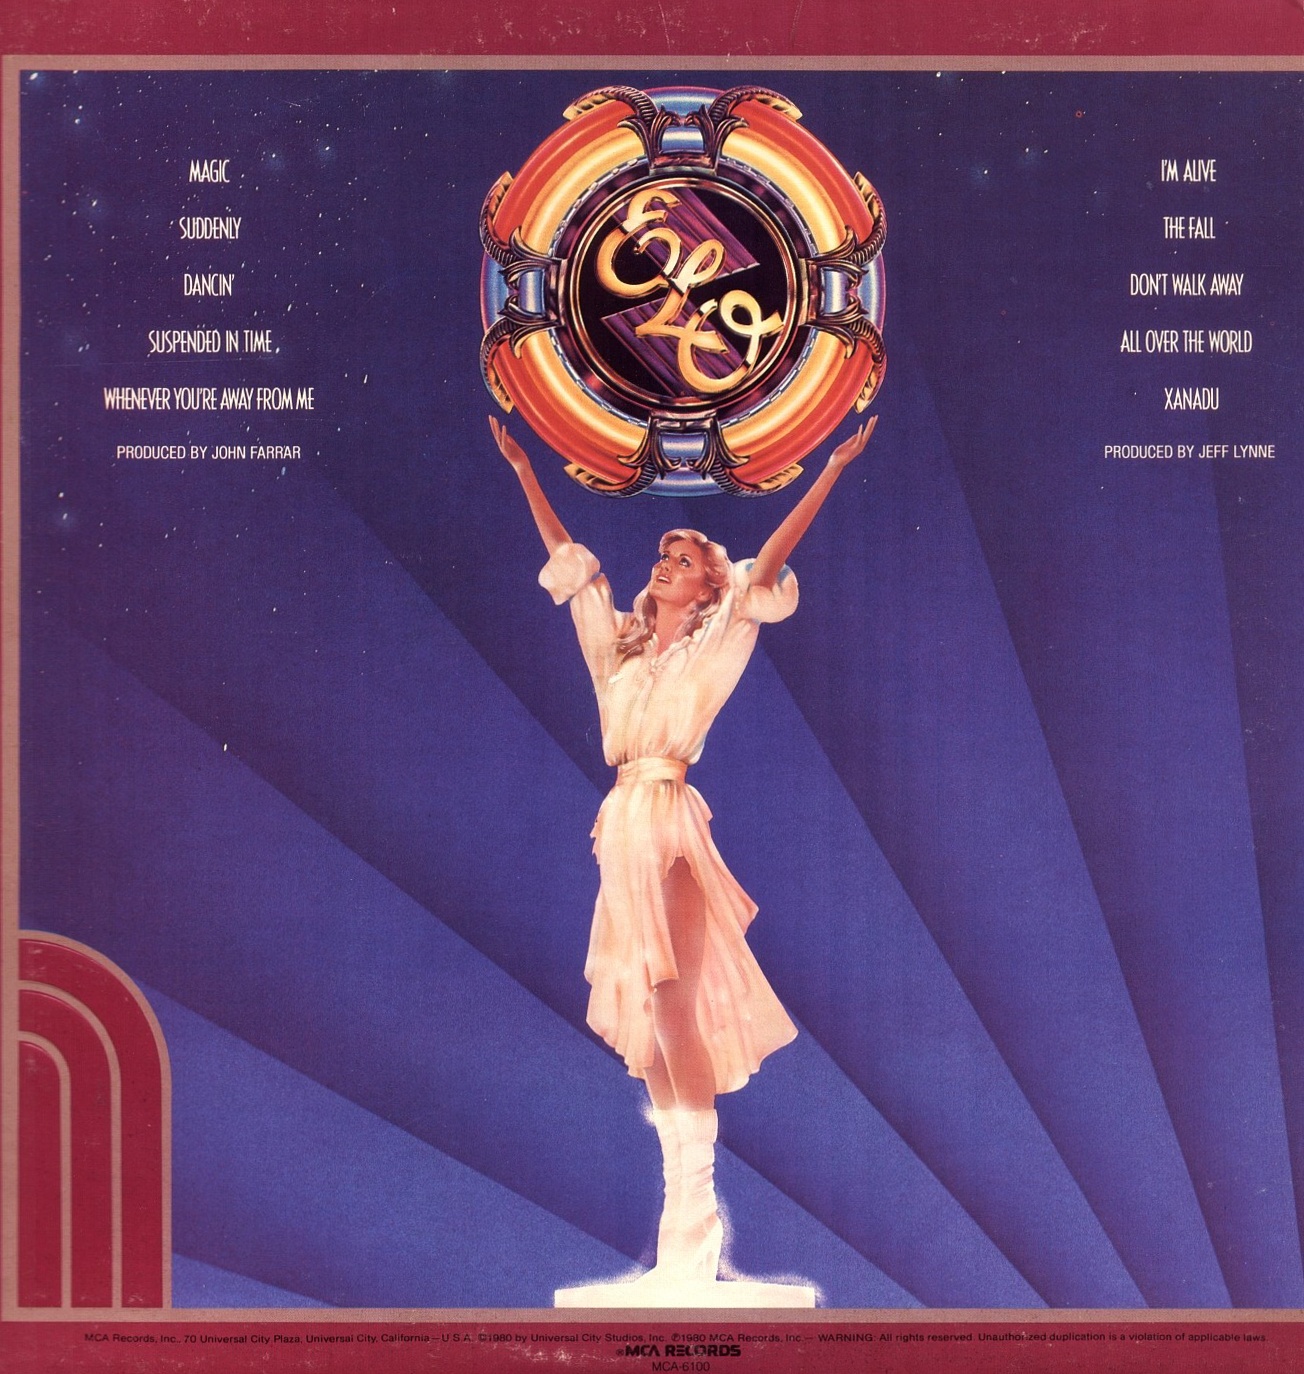 electric light orchestra album covers